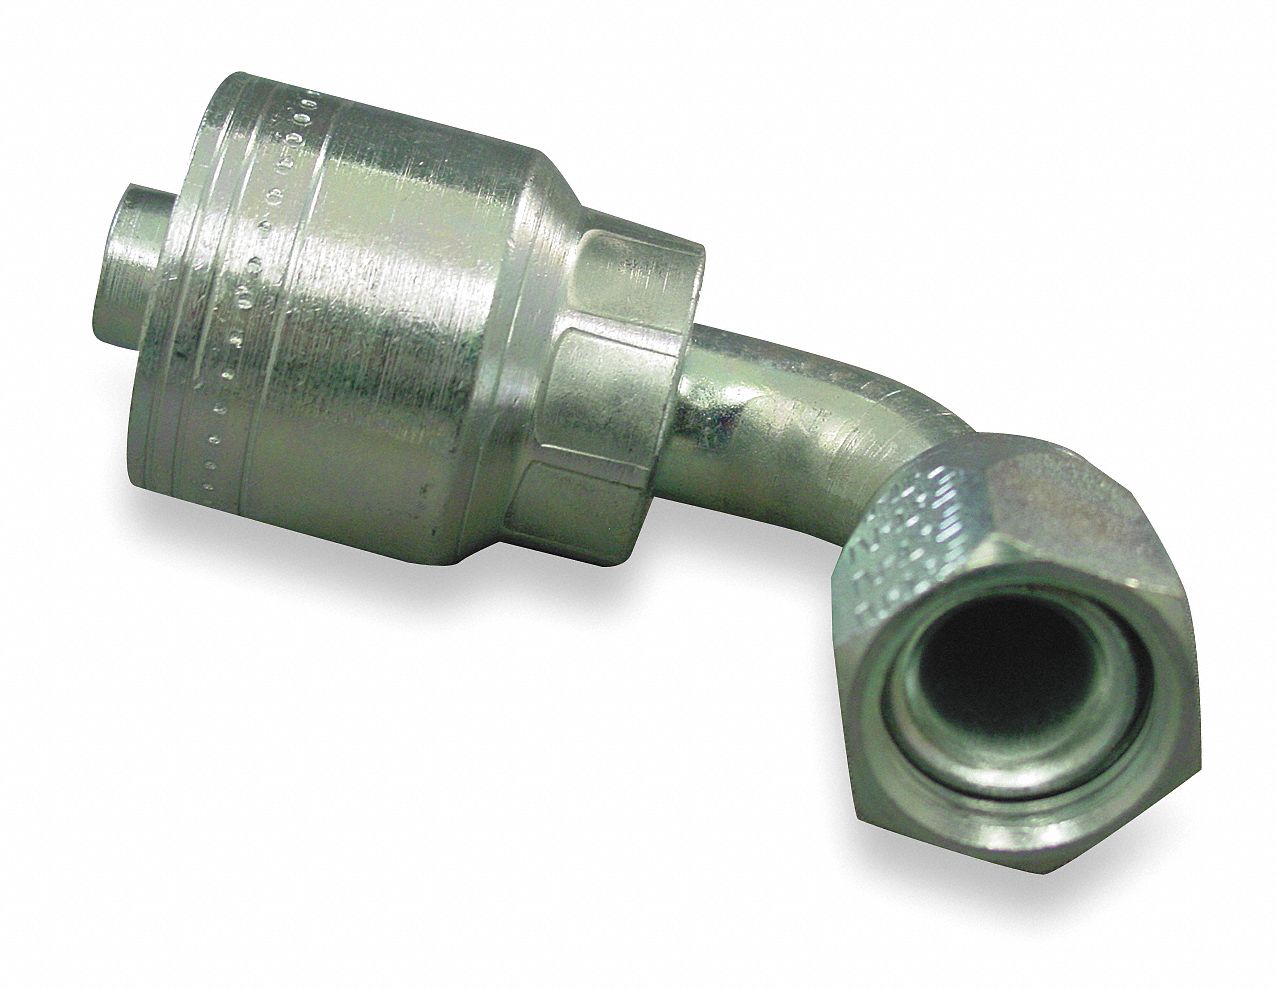 Hydraulic Crimp Fitting Fitting Material Steel x Steel Fitting Size 1/2